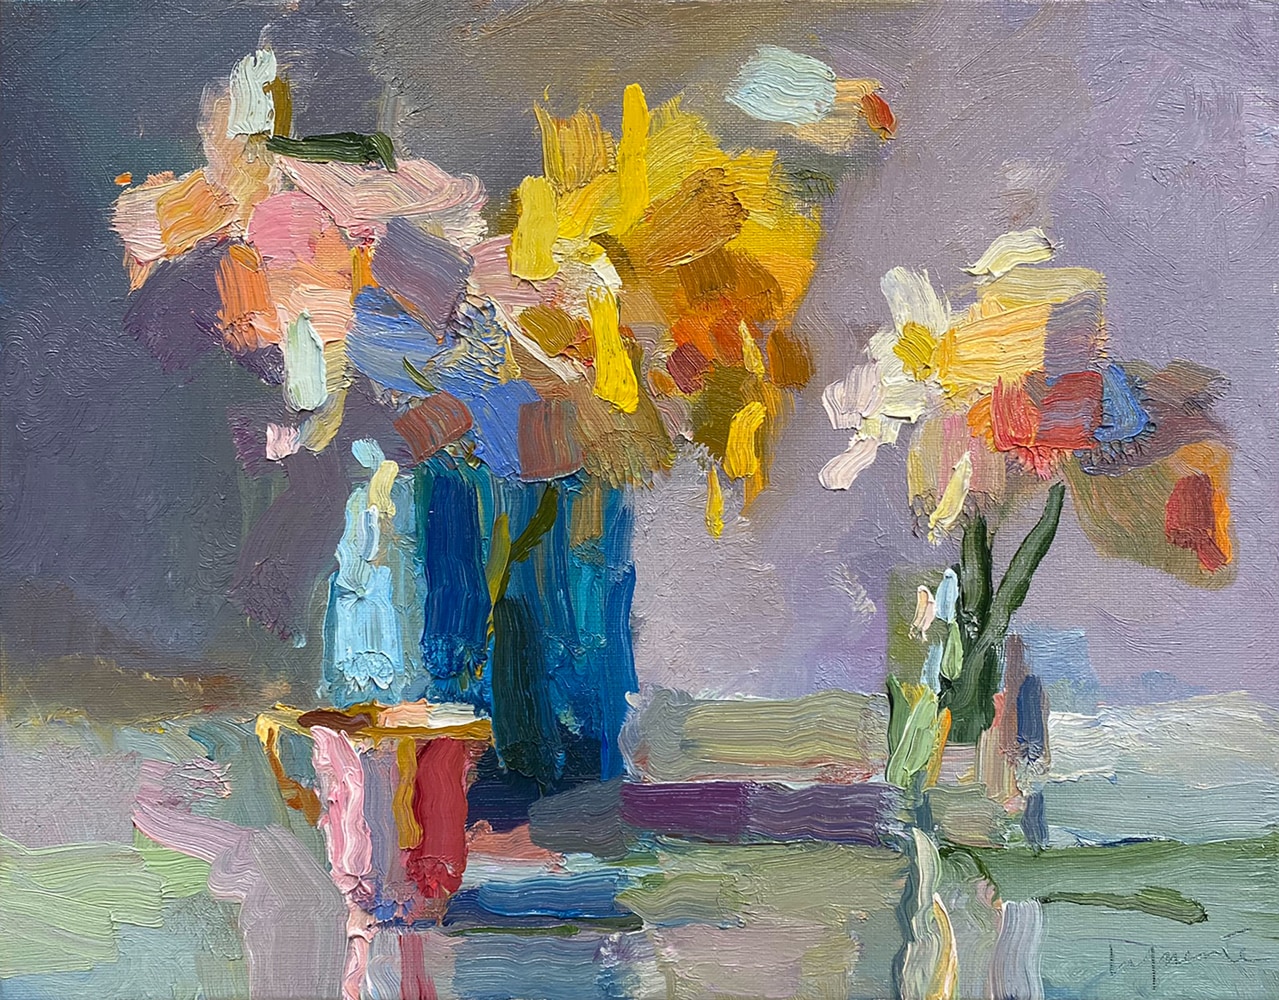 Daffodils And Teacup (SOLD)

11&amp;quot; x 14&amp;quot;

Oil On Linen

&amp;nbsp;

&amp;nbsp;